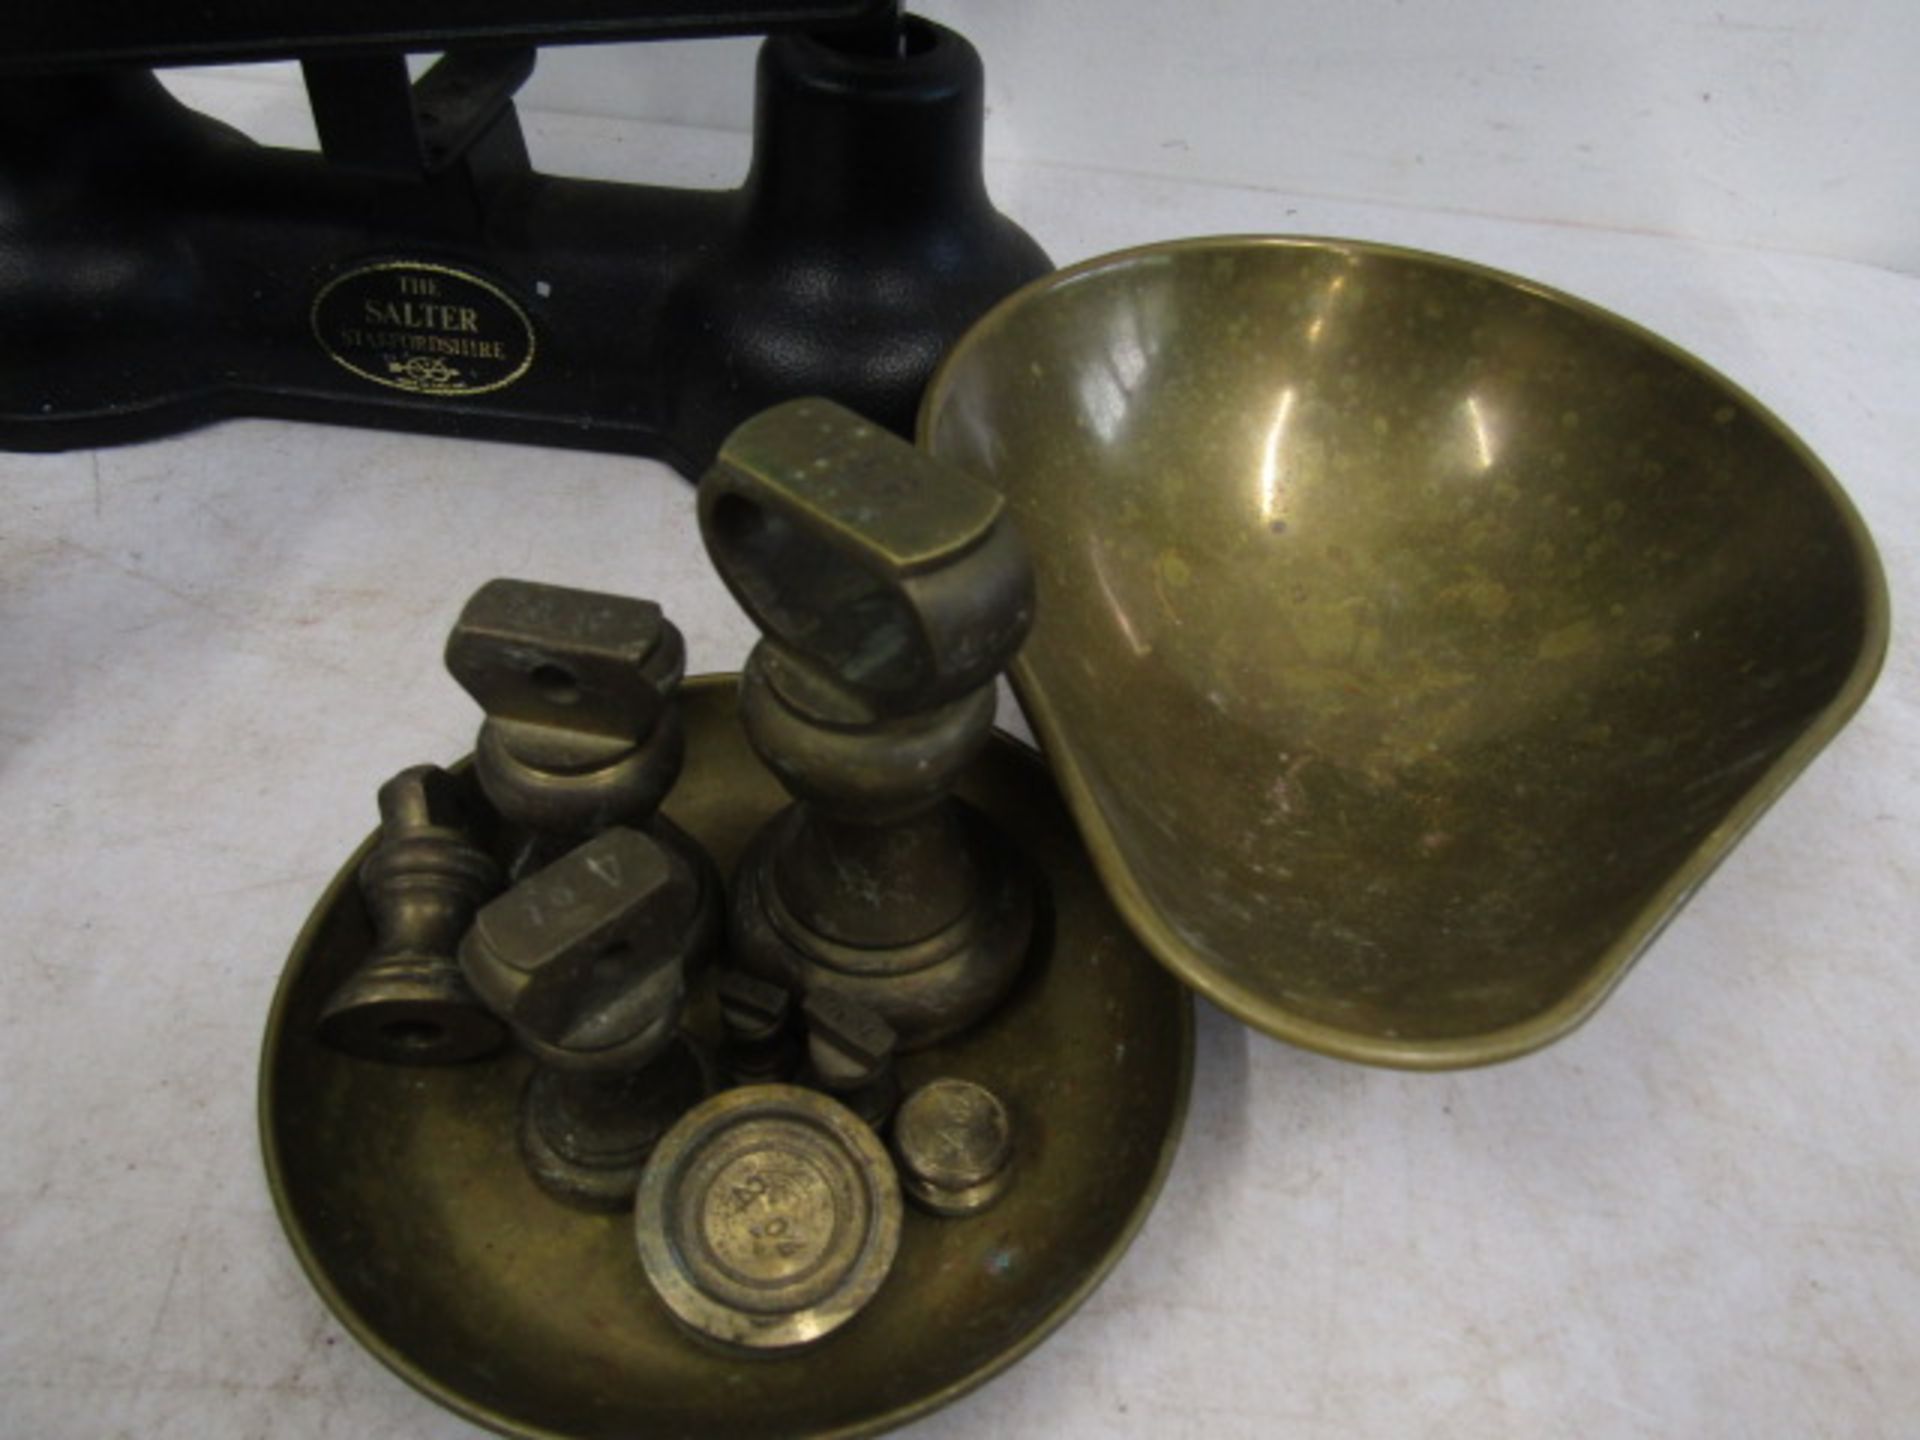 Salter scales and 3 sets weights with extra brass pans - Image 4 of 4